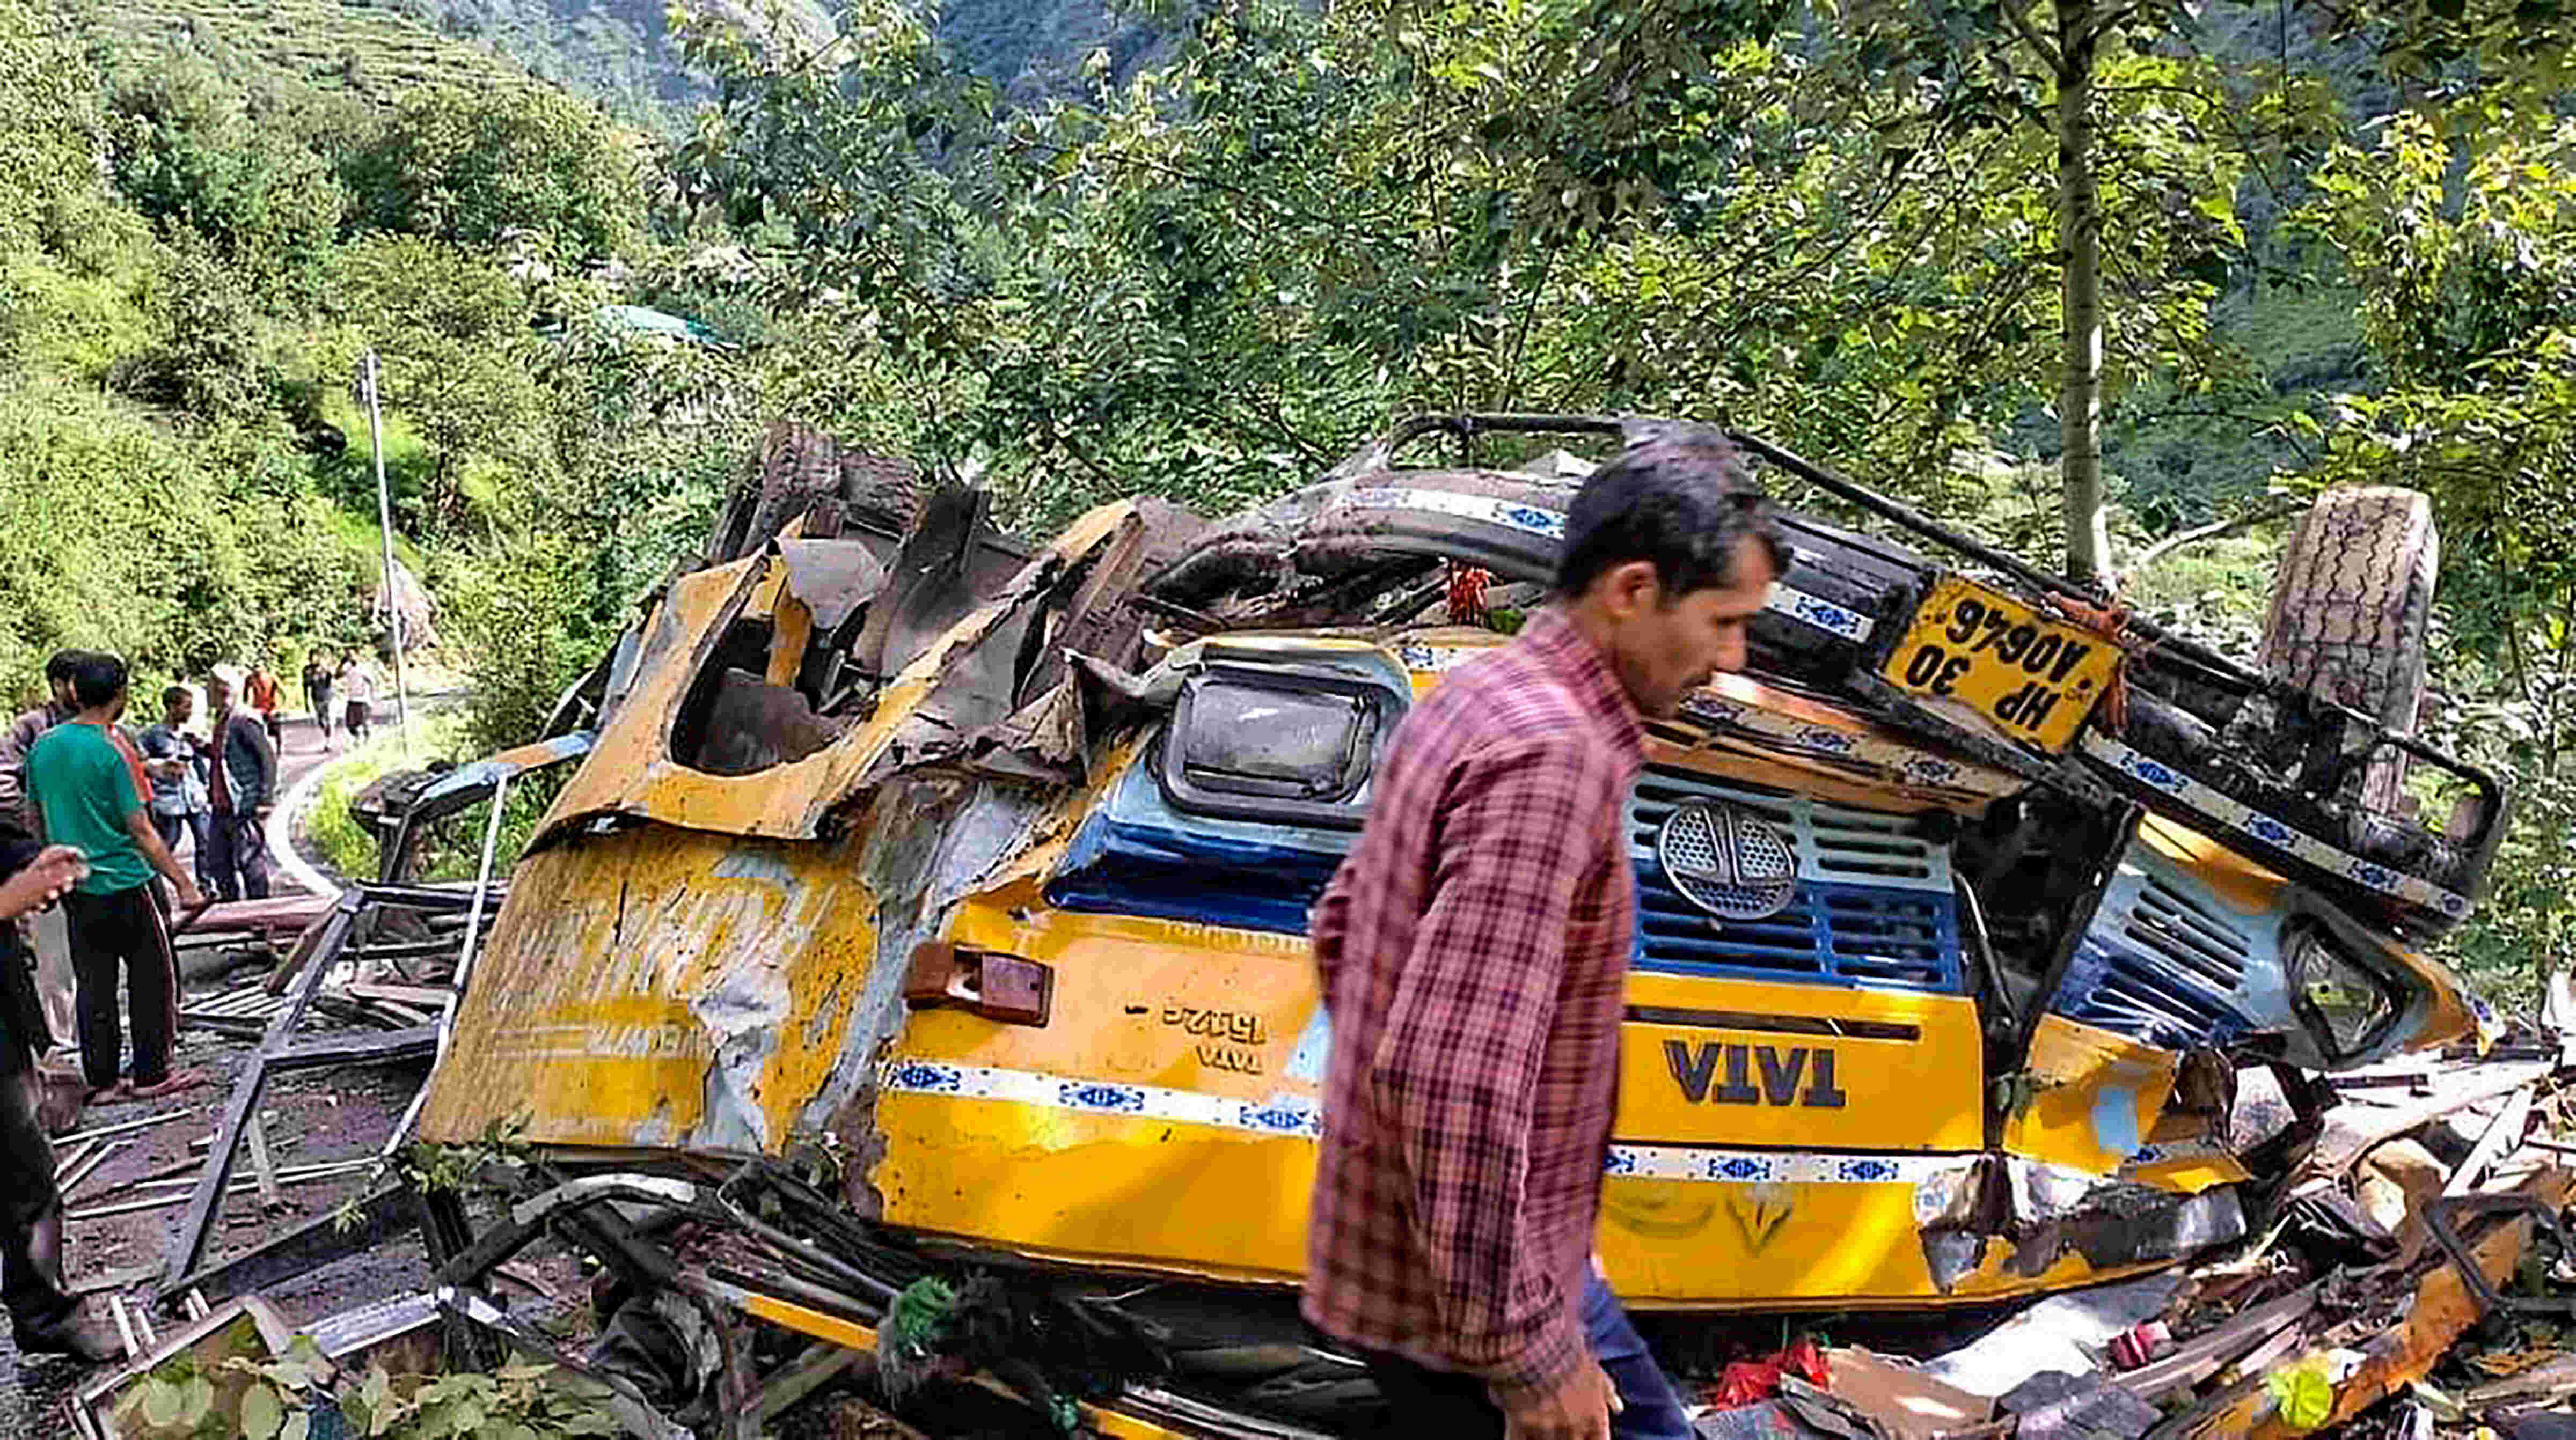 Kullu accident: PM announces ex-gratia of Rs 2 lakh each for next of kin of those killed